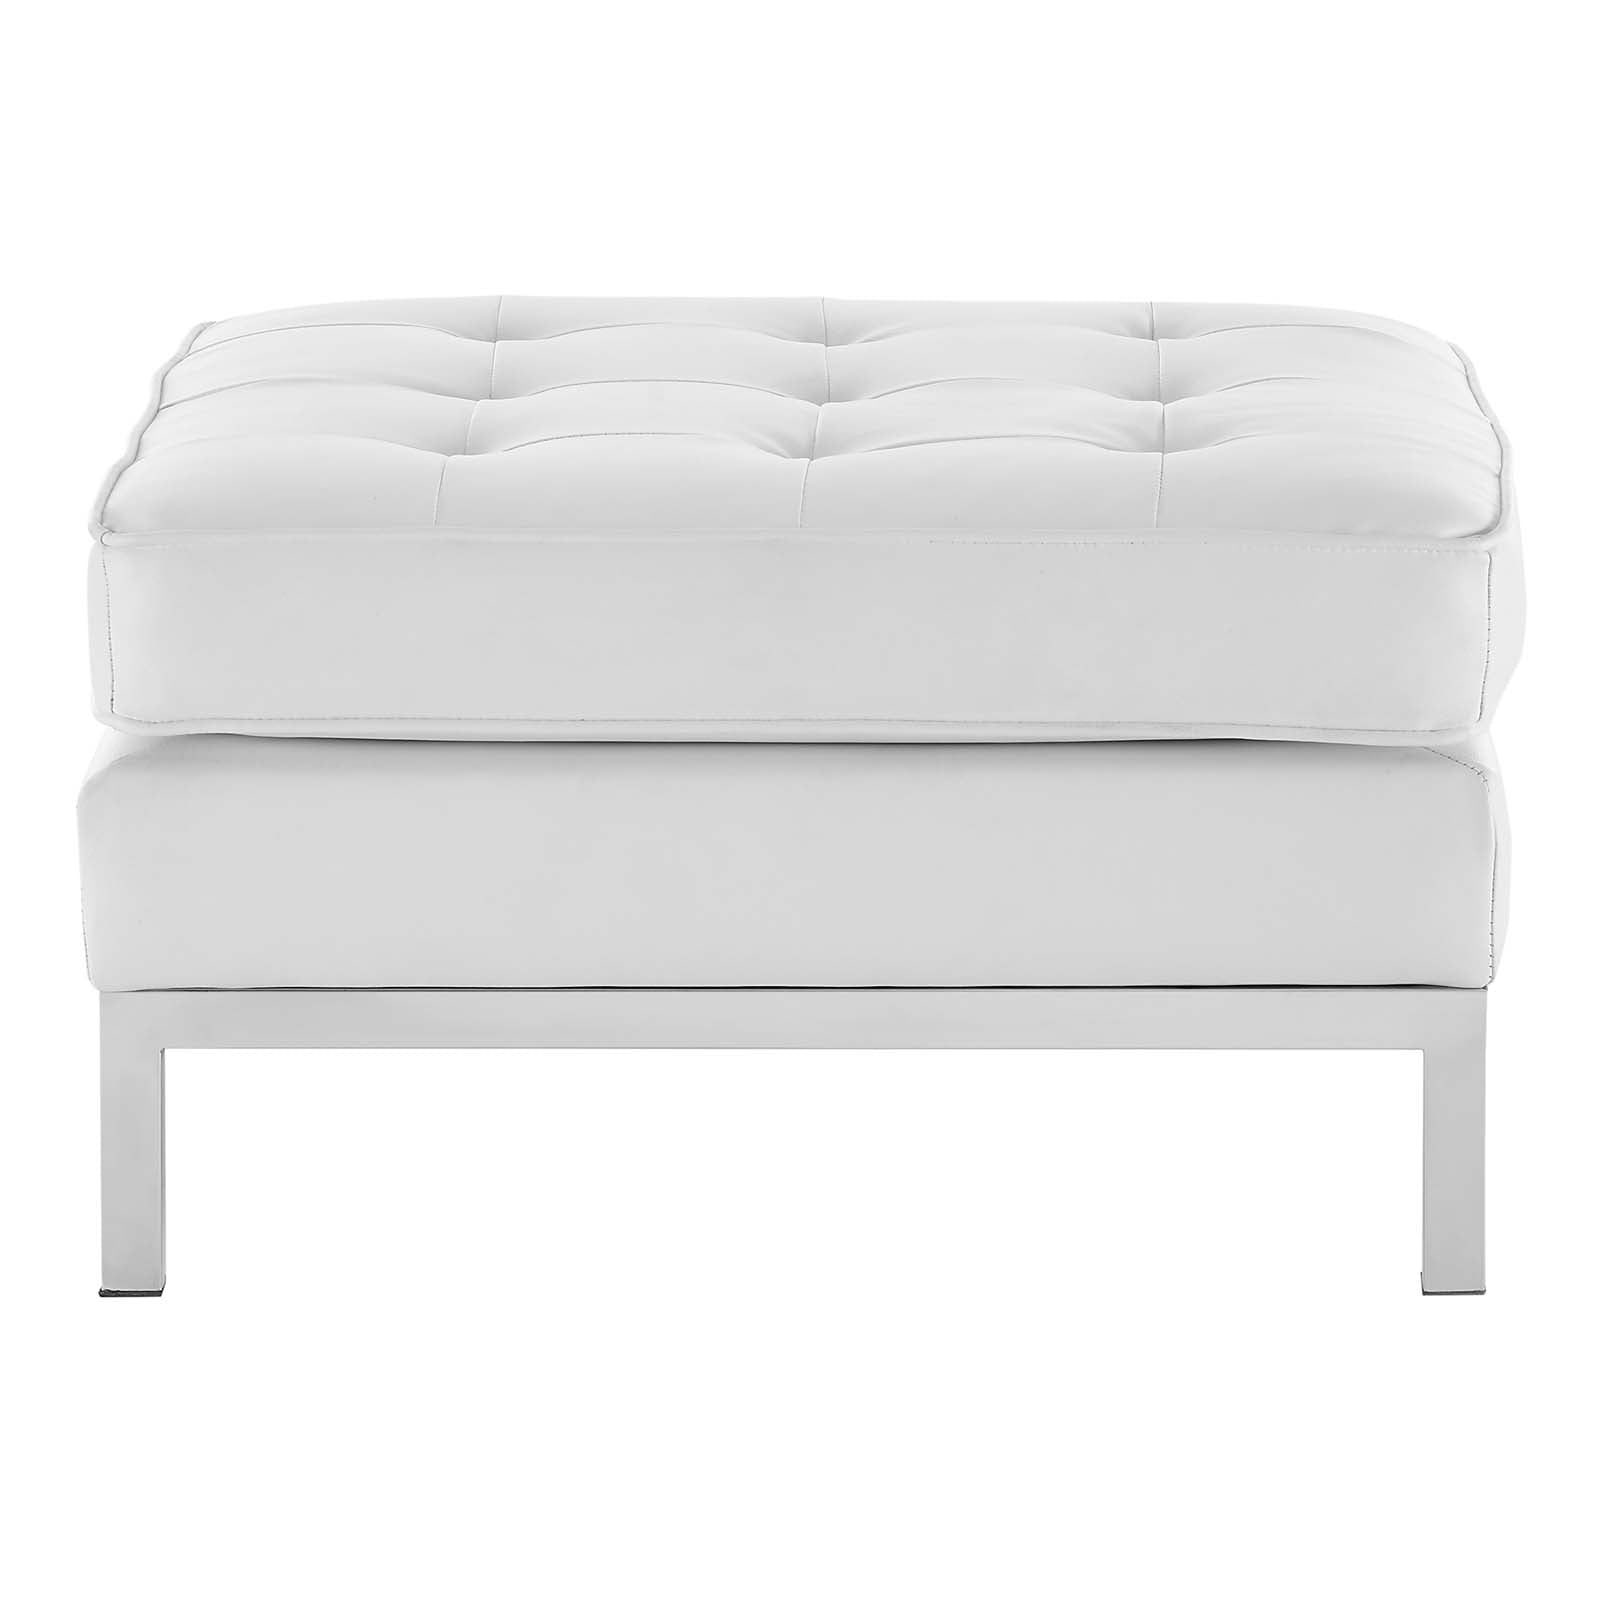 Loft Tufted Upholstered Faux Leather Ottoman